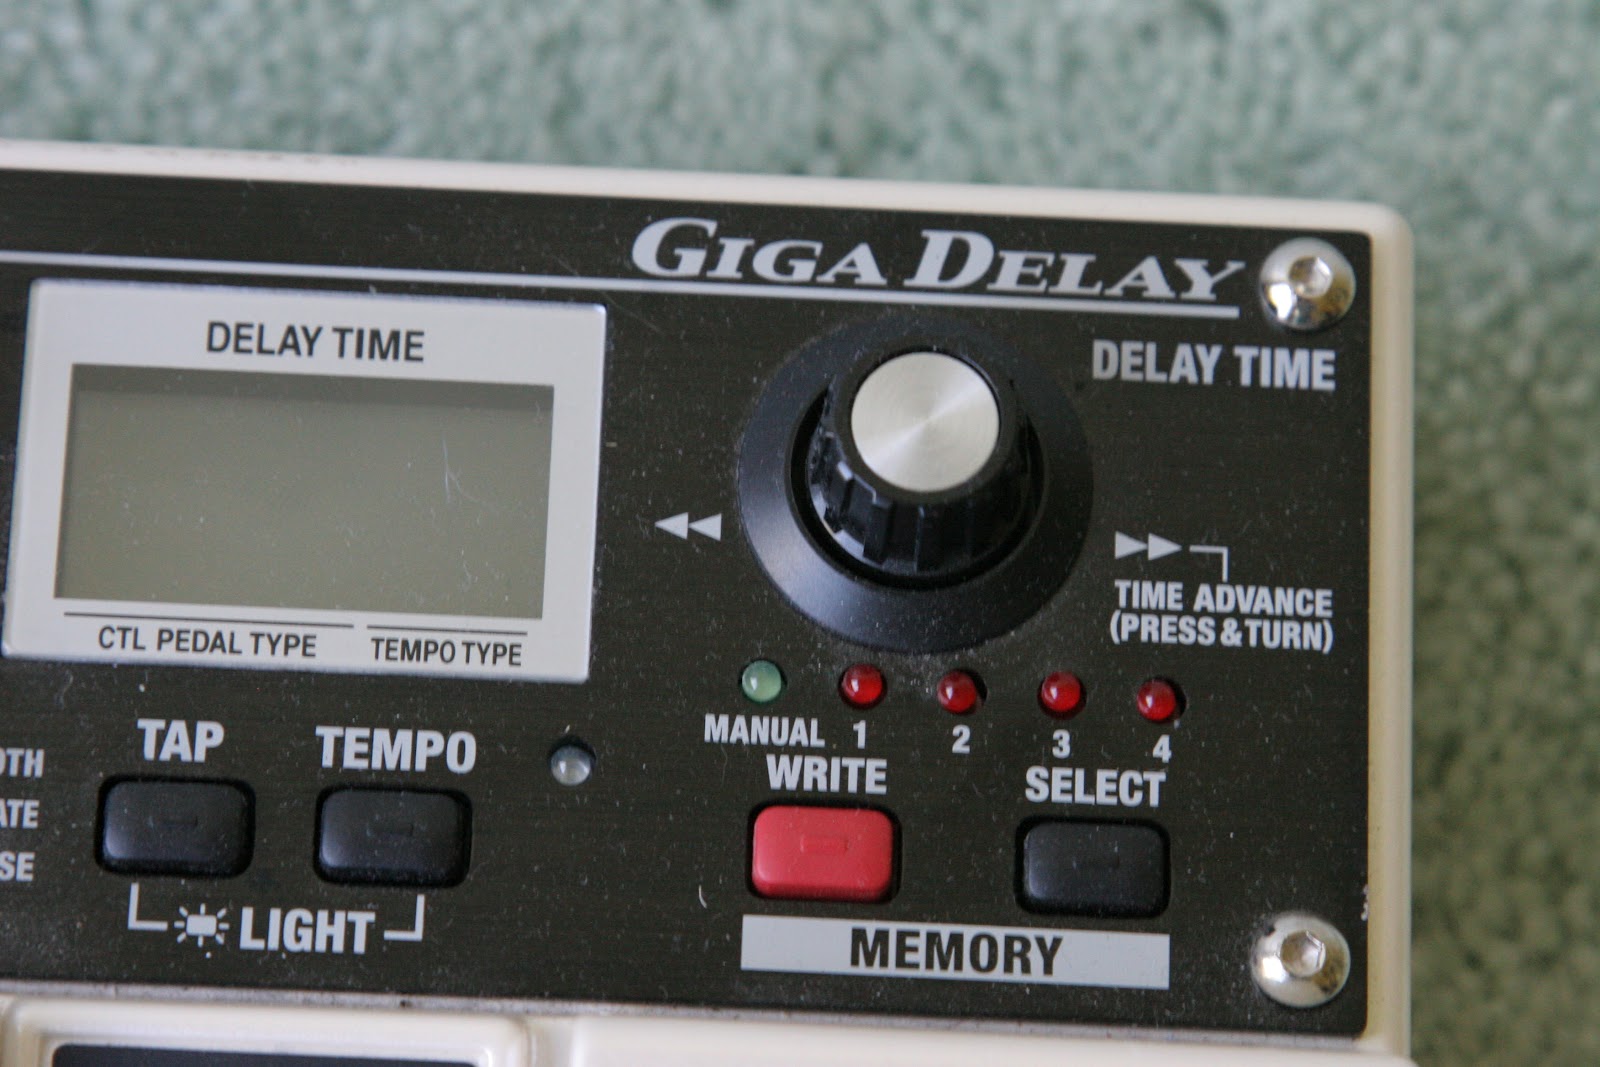 Guitar Industry Trends and Dynamics: Boss DD-20 Giga Delay Guitar Effects